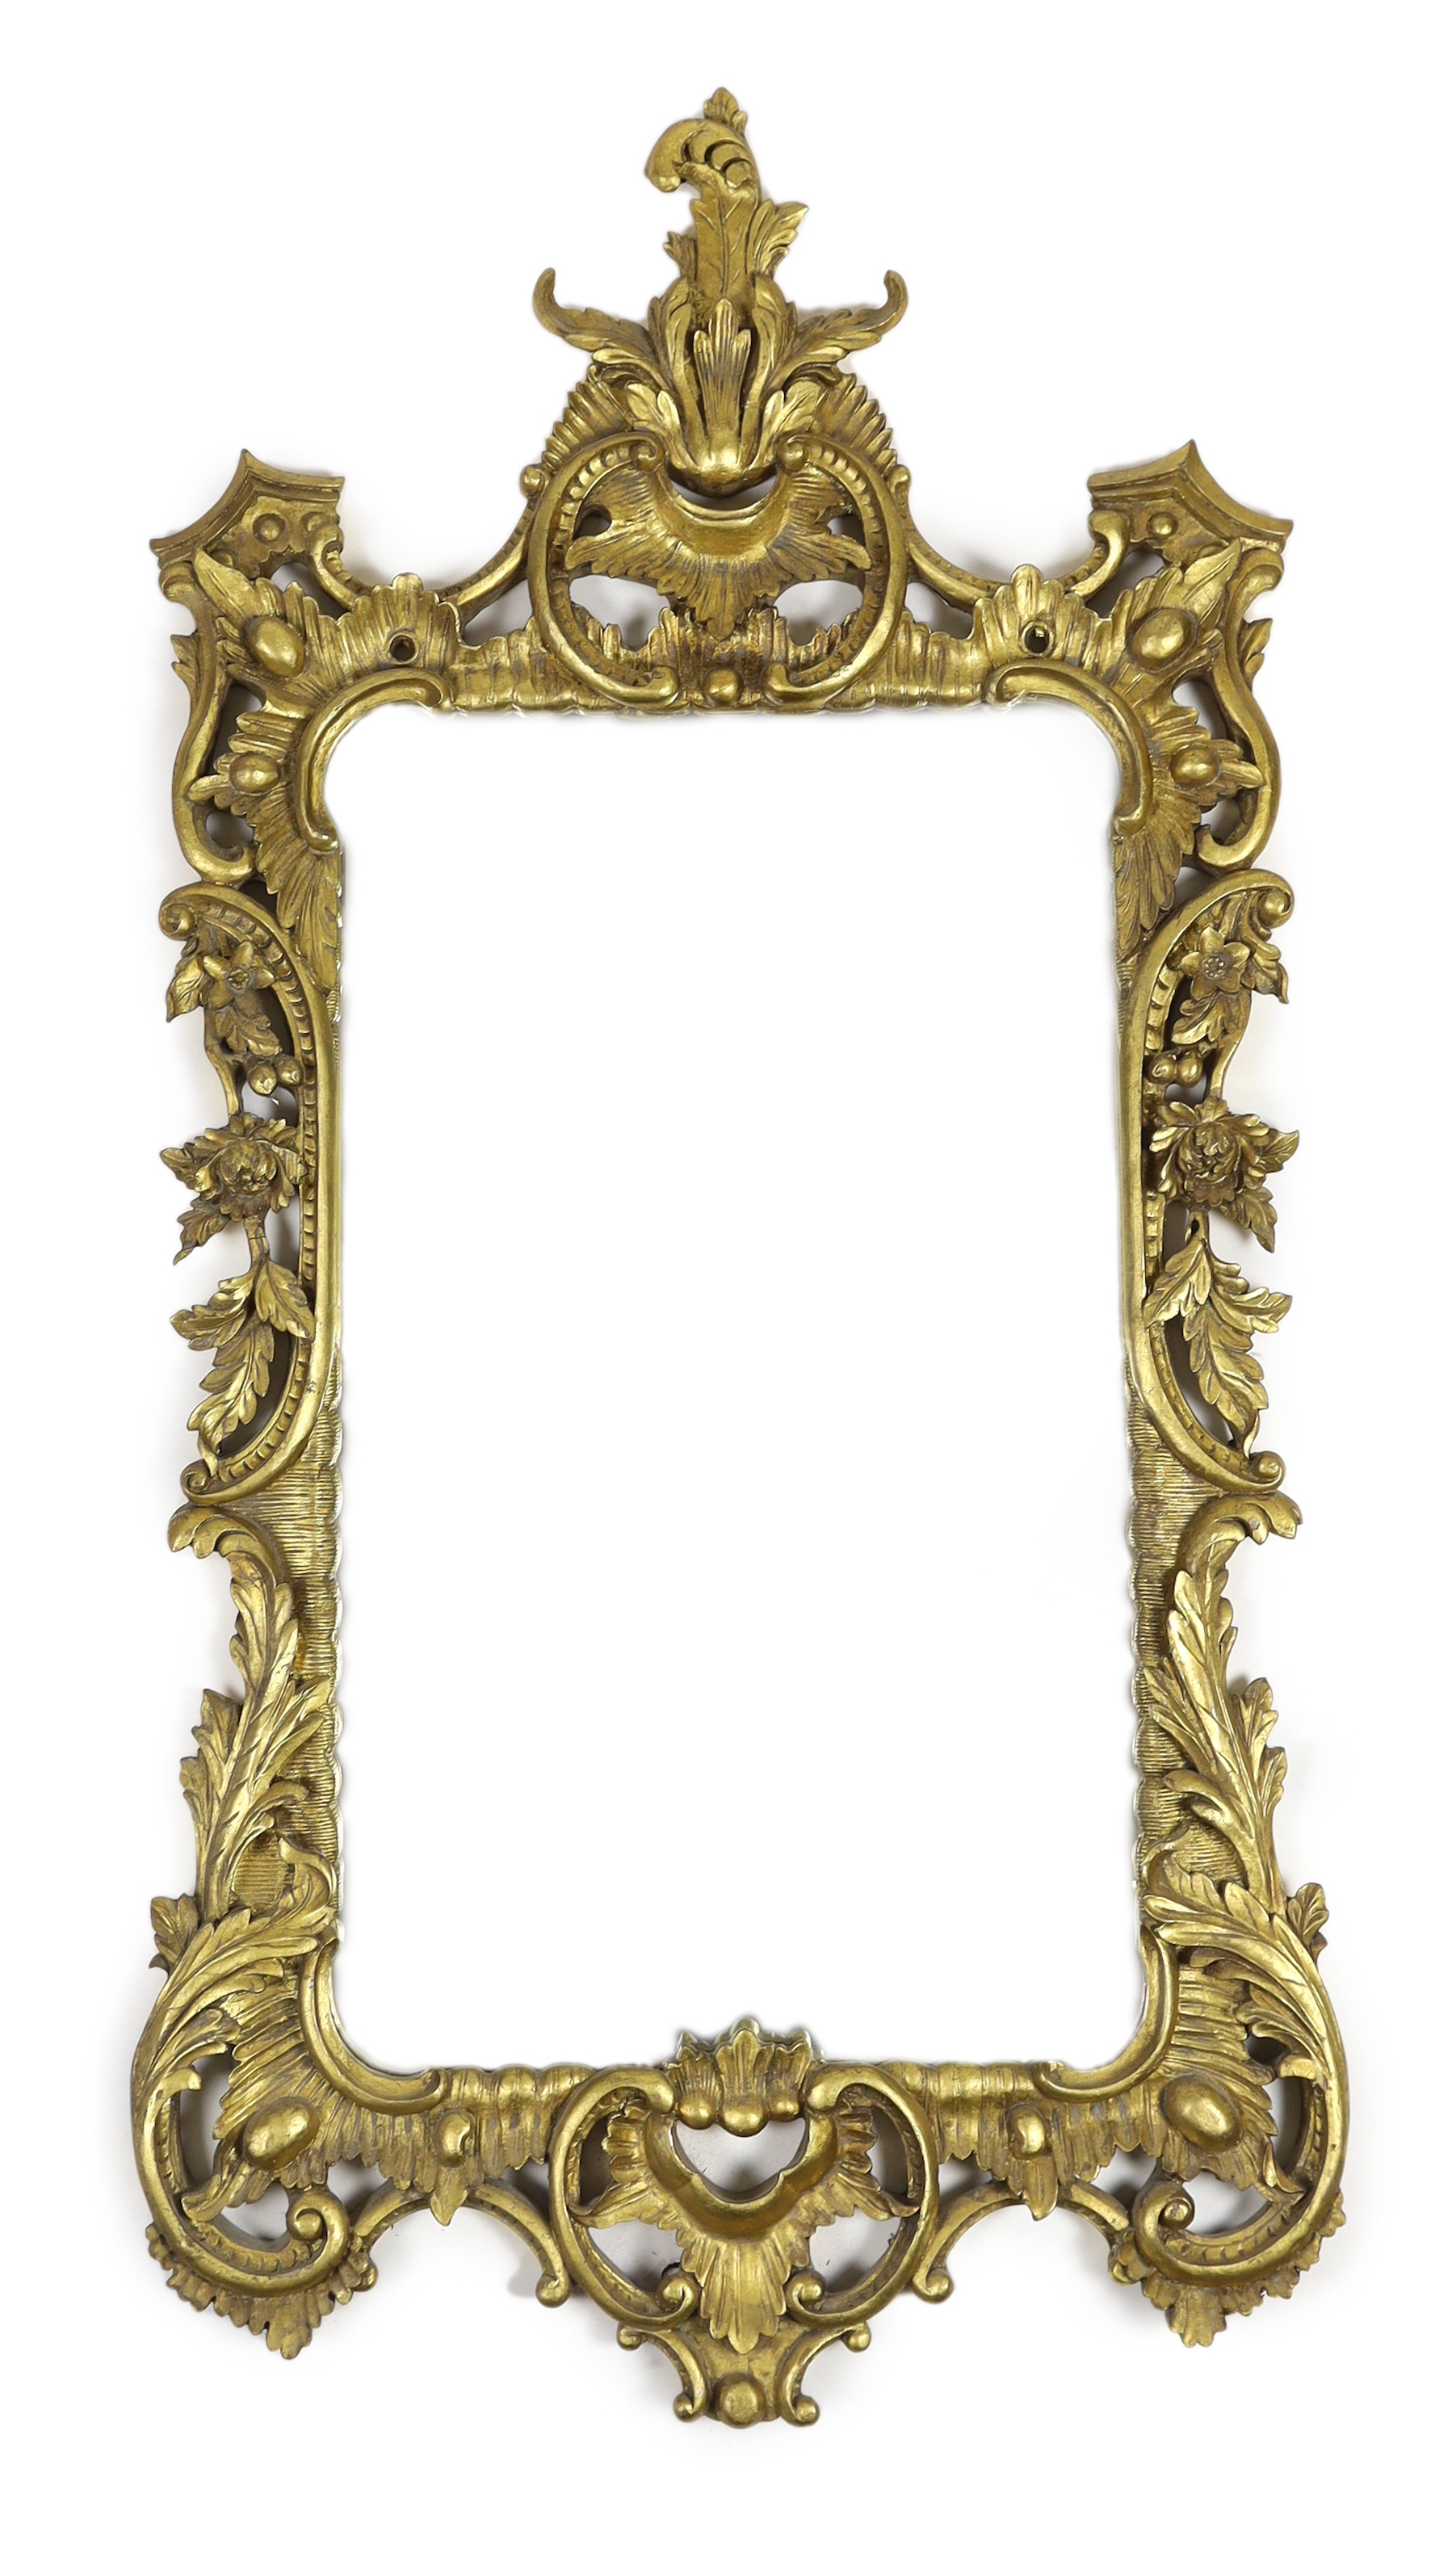 A 19th century Chippendale style carved giltwood wall mirror, with foliate scroll frame and